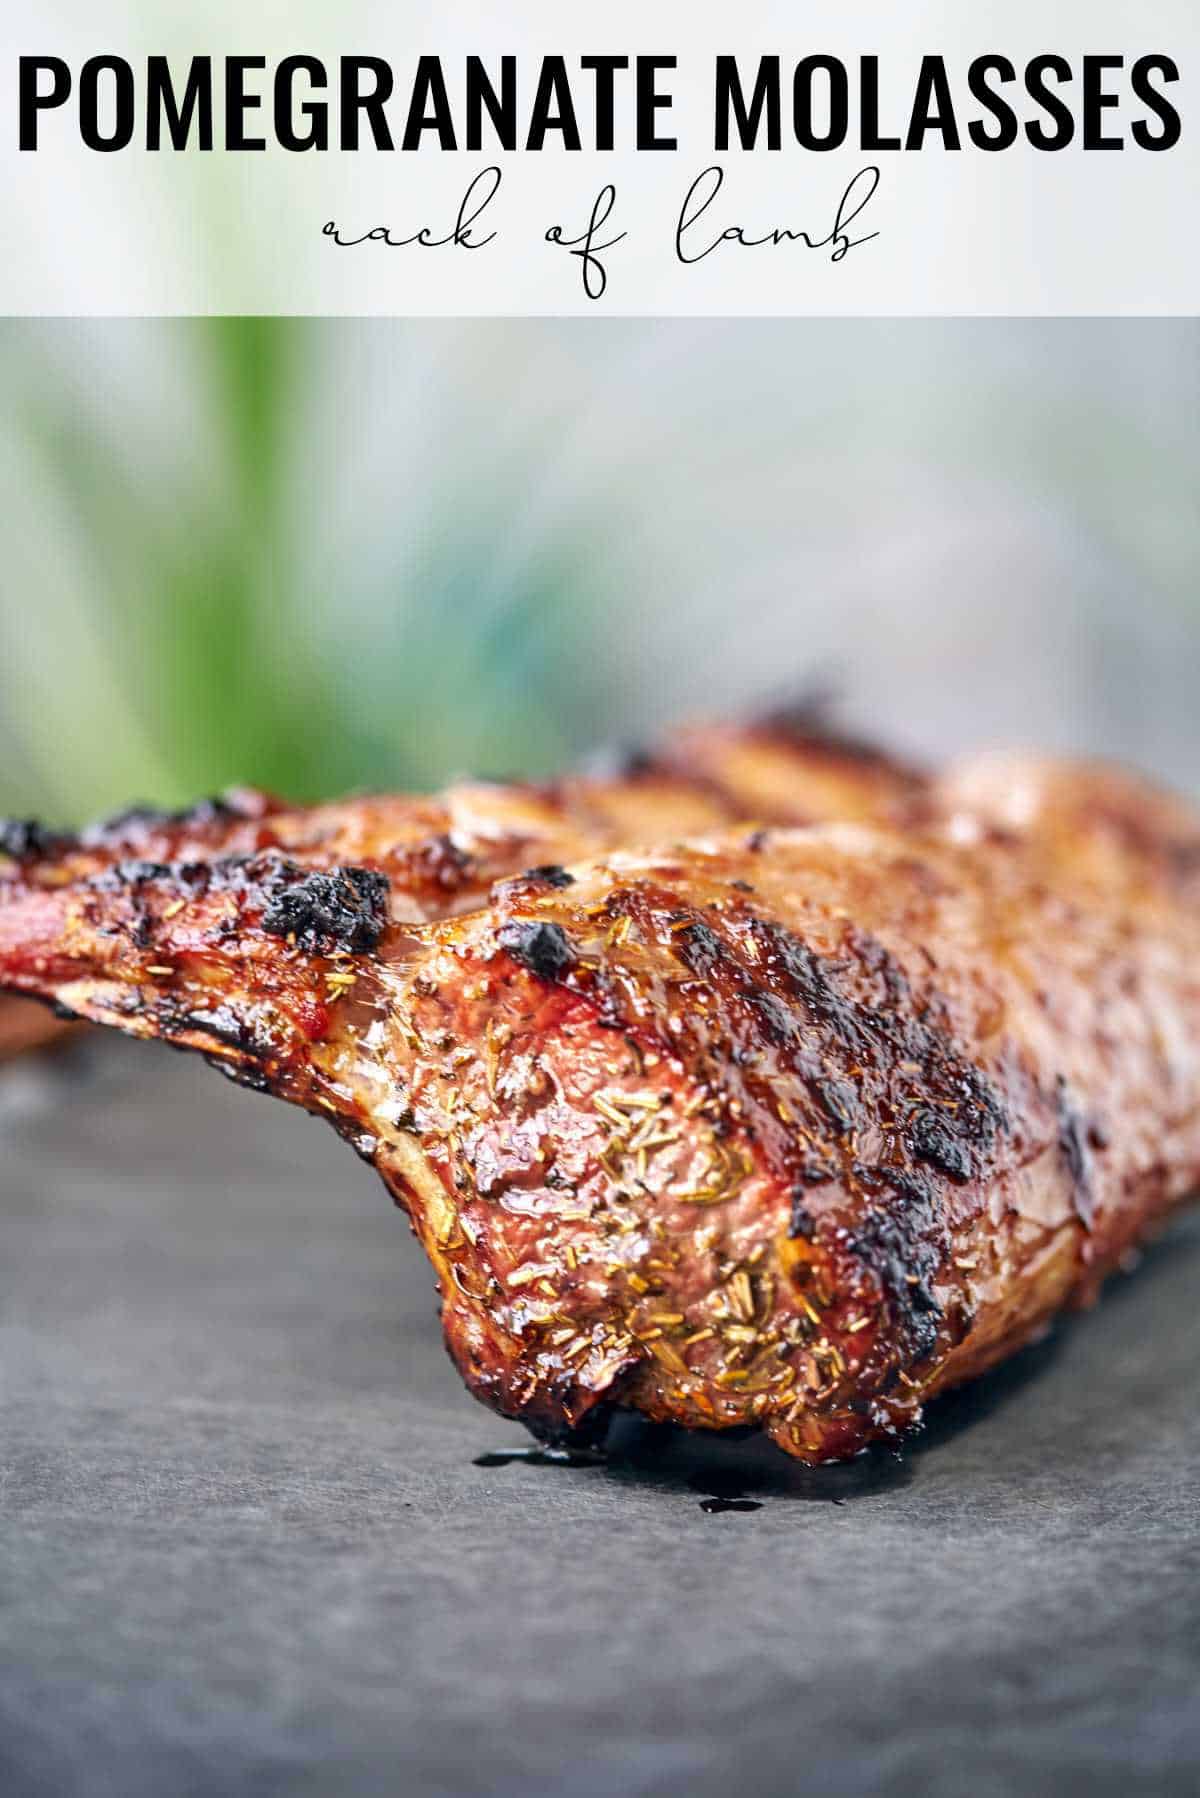 Pomegranate Molasses Lamb - What to Serve with Rack of Lamb